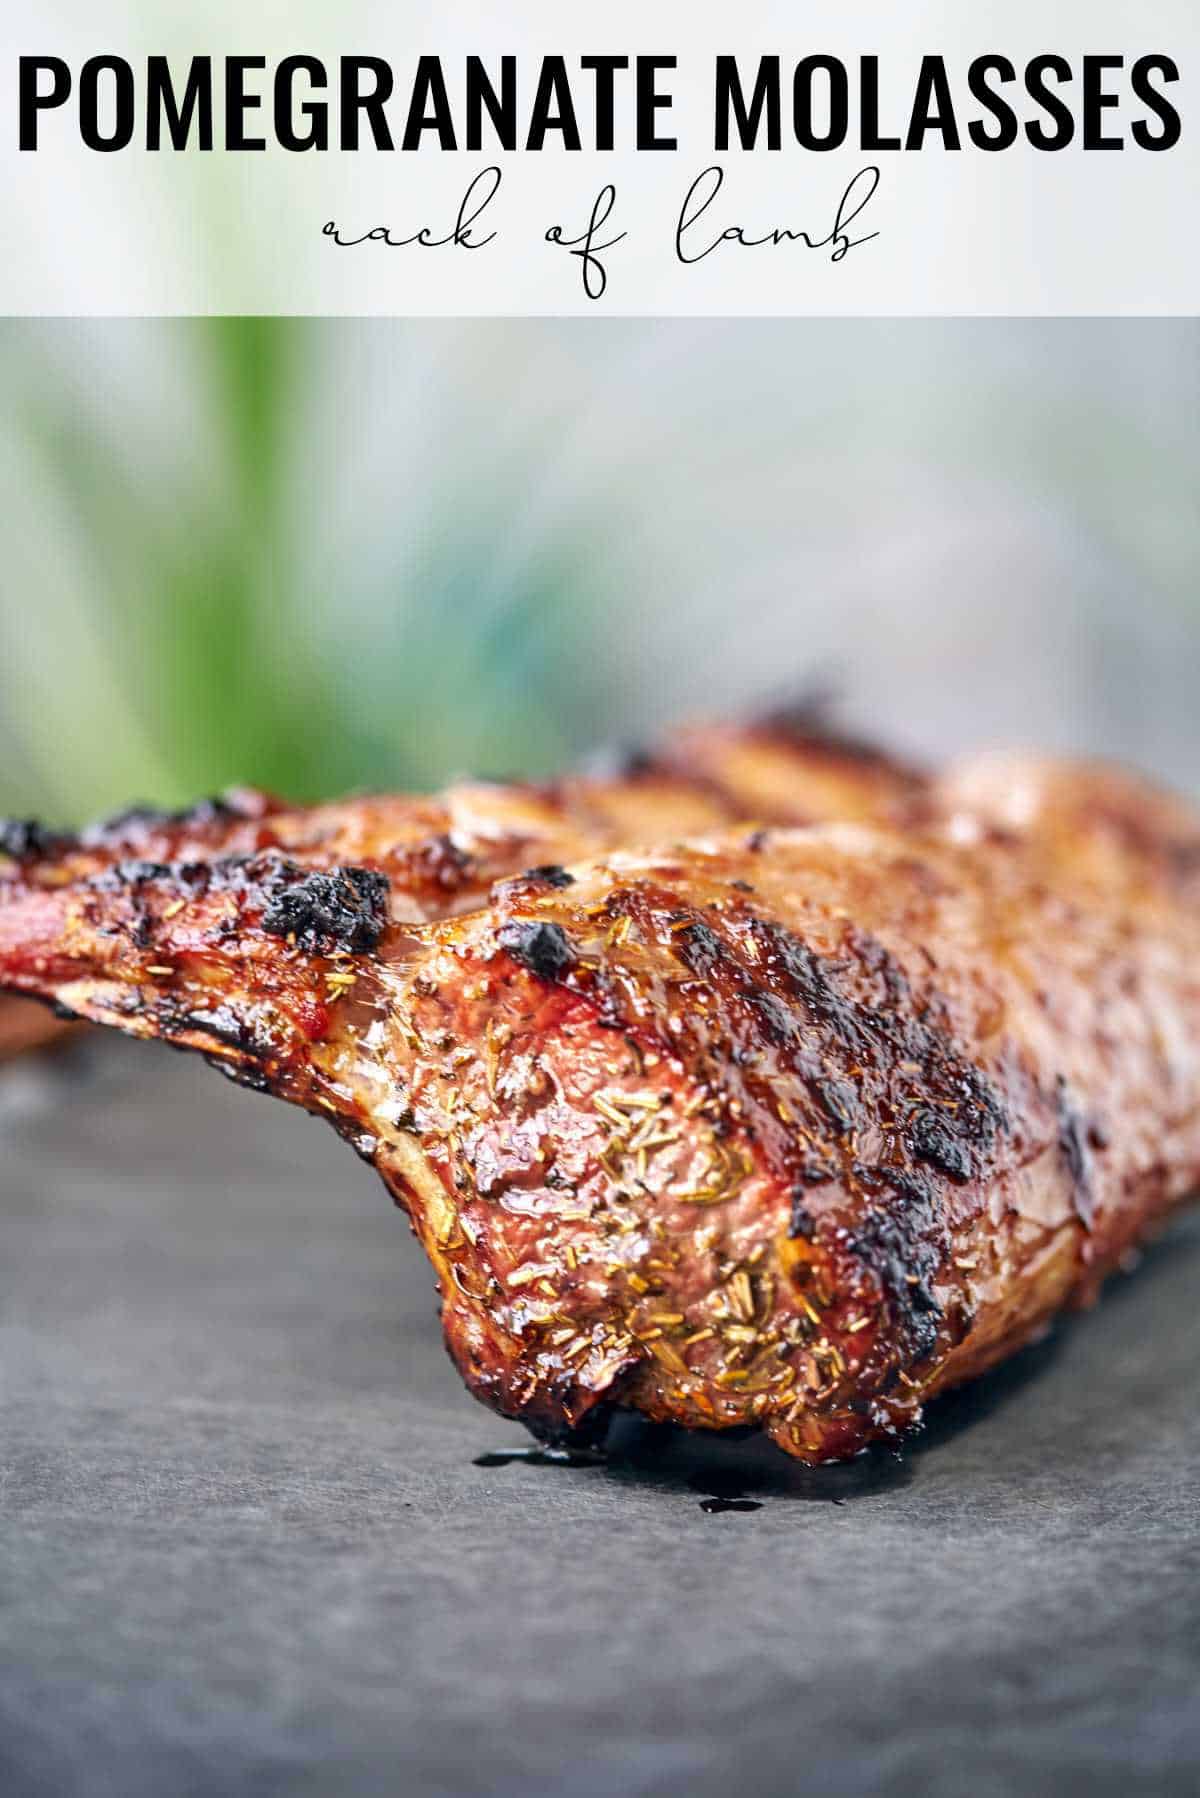 Pomegranate Molasses Lamb - What to Serve with Rack of Lamb